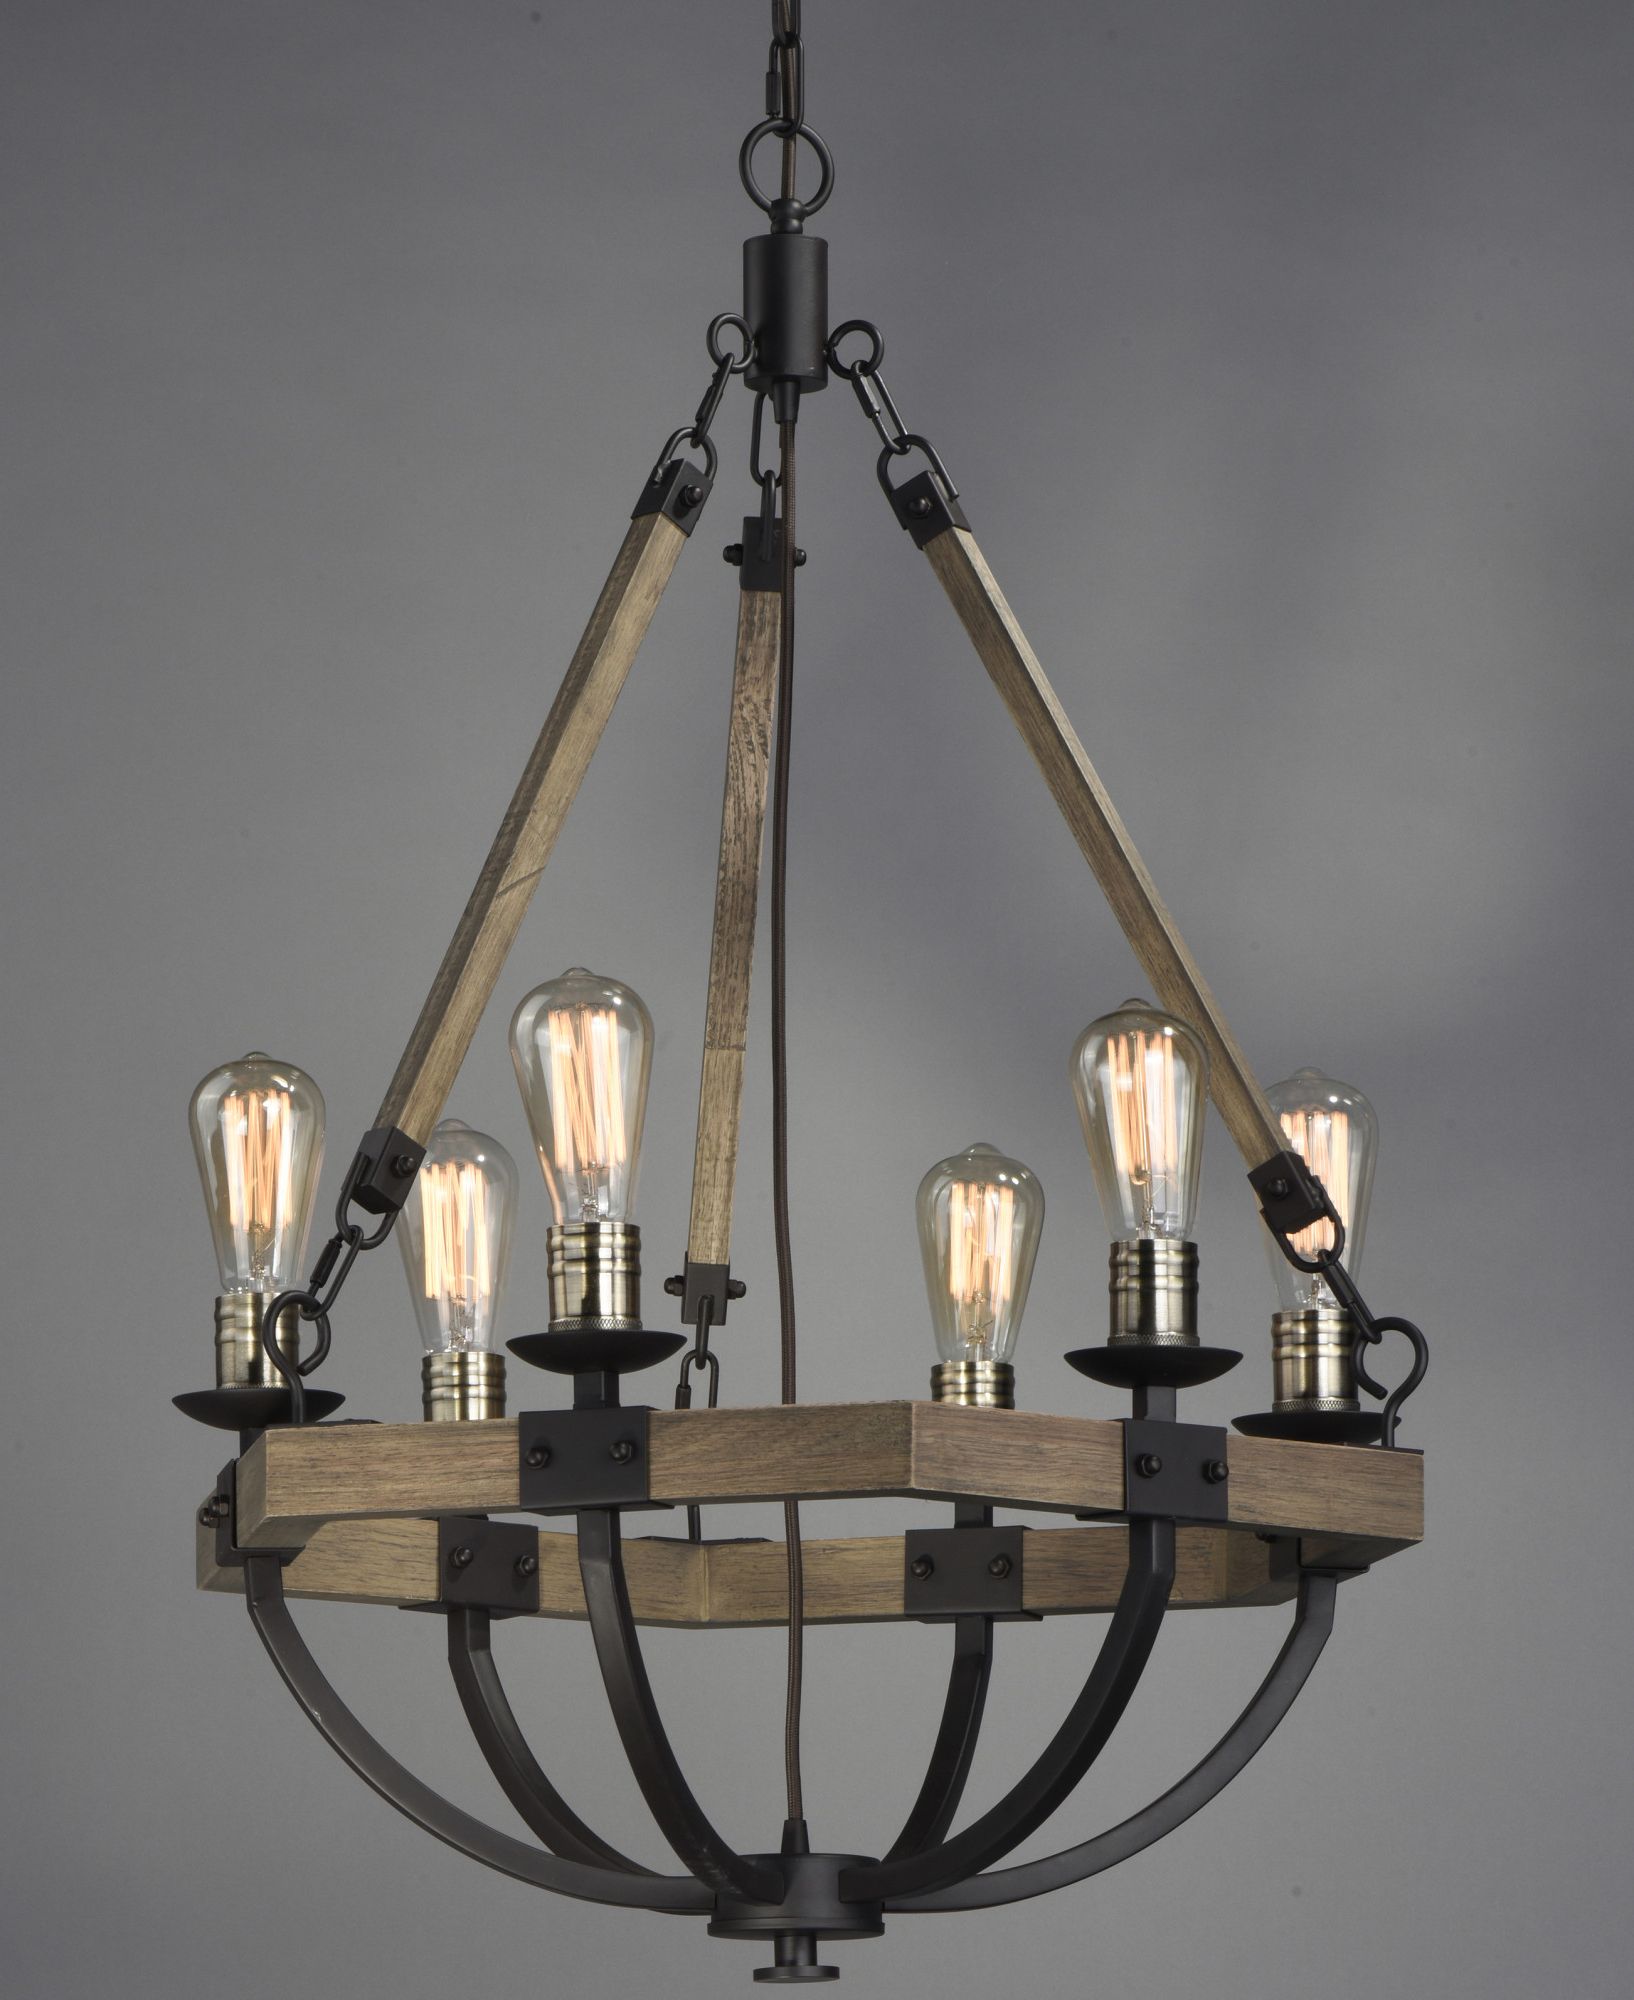 Widely Used Weathered Oak Wood Chandeliers Regarding Maxim 20335 Bronze And Oak Lodge 6 Light 24" Weathered (View 20 of 20)